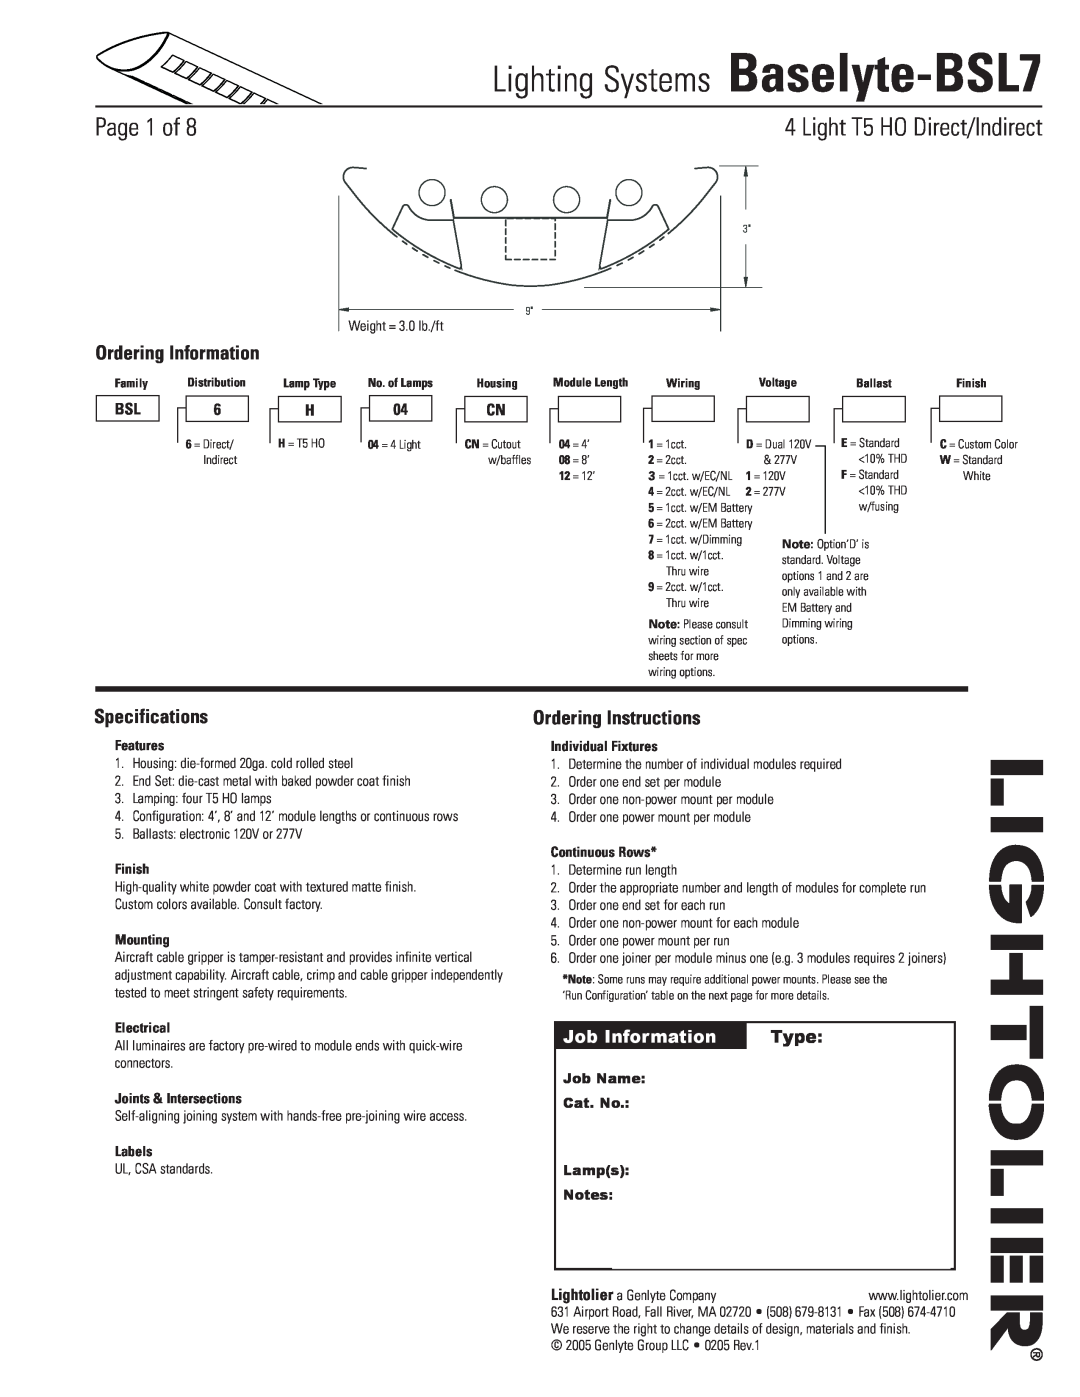 Lightolier specifications Lighting Systems Baselyte-BSL7, Page  of, Light T5 HO Direct/Indirect, Ordering Information 